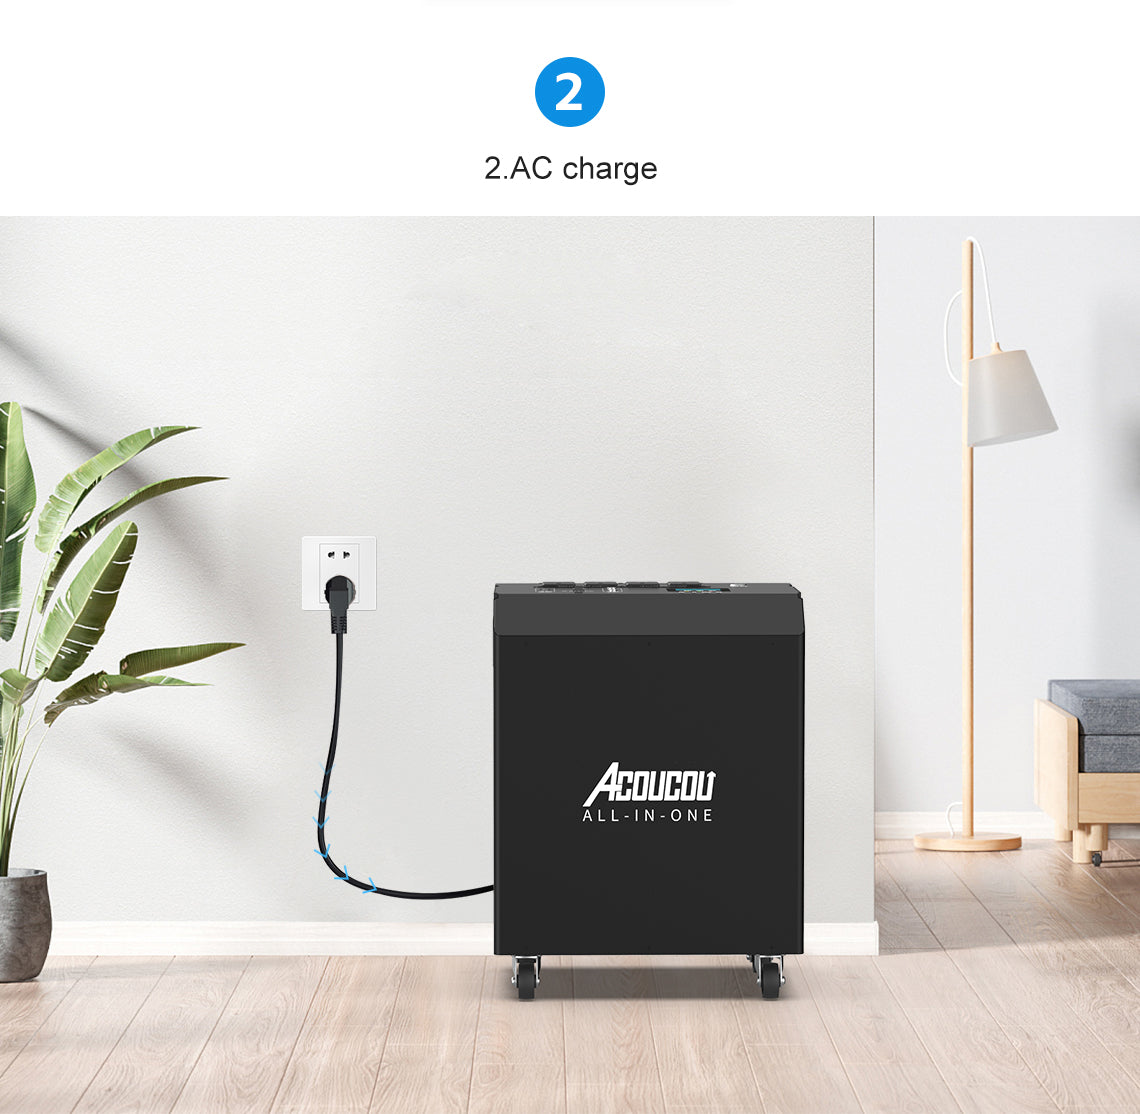 Acoucou All-In-One Three Ways to Charge